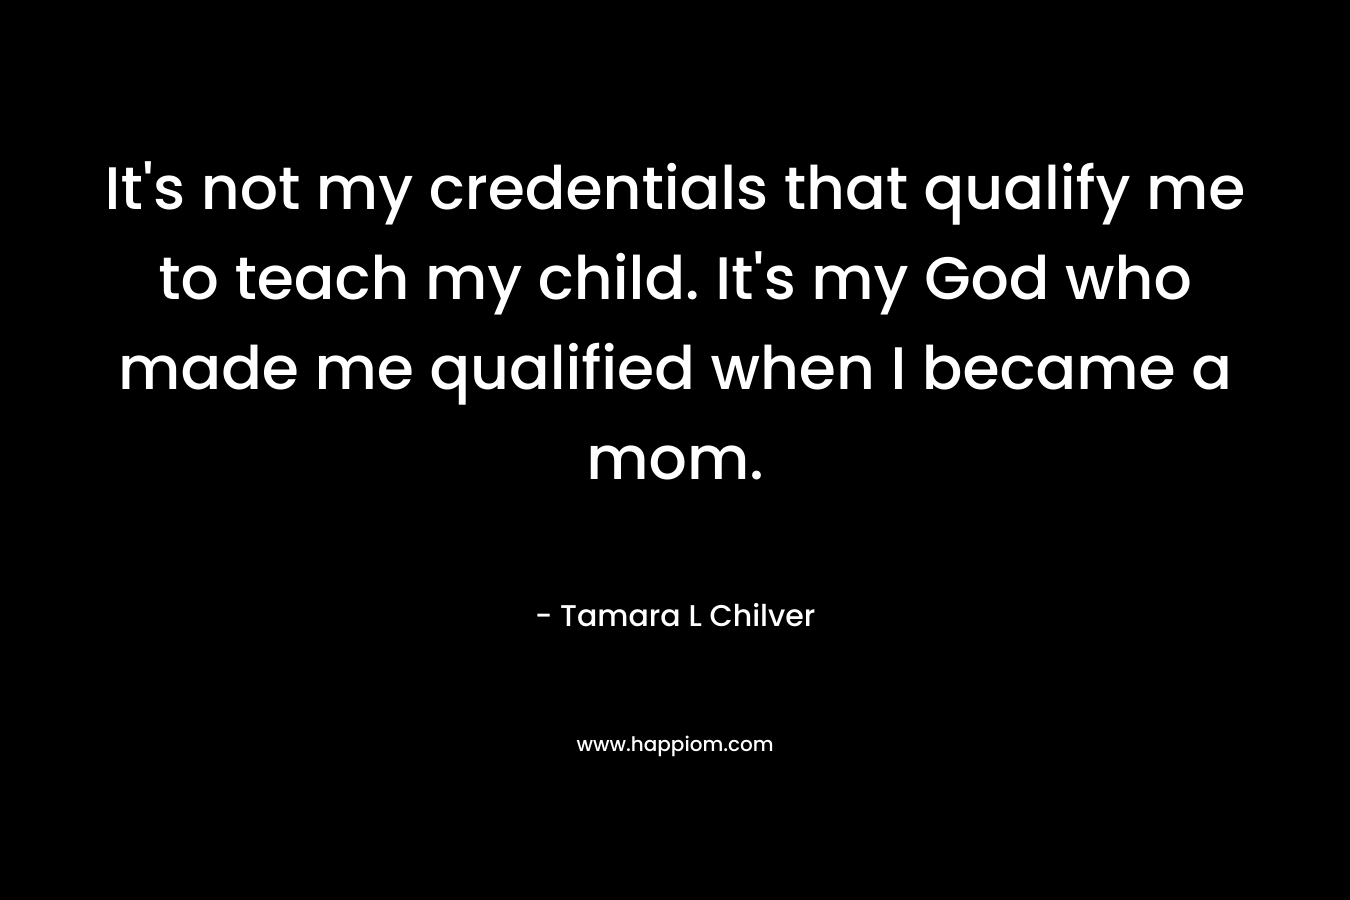 It’s not my credentials that qualify me to teach my child. It’s my God who made me qualified when I became a mom. – Tamara L Chilver